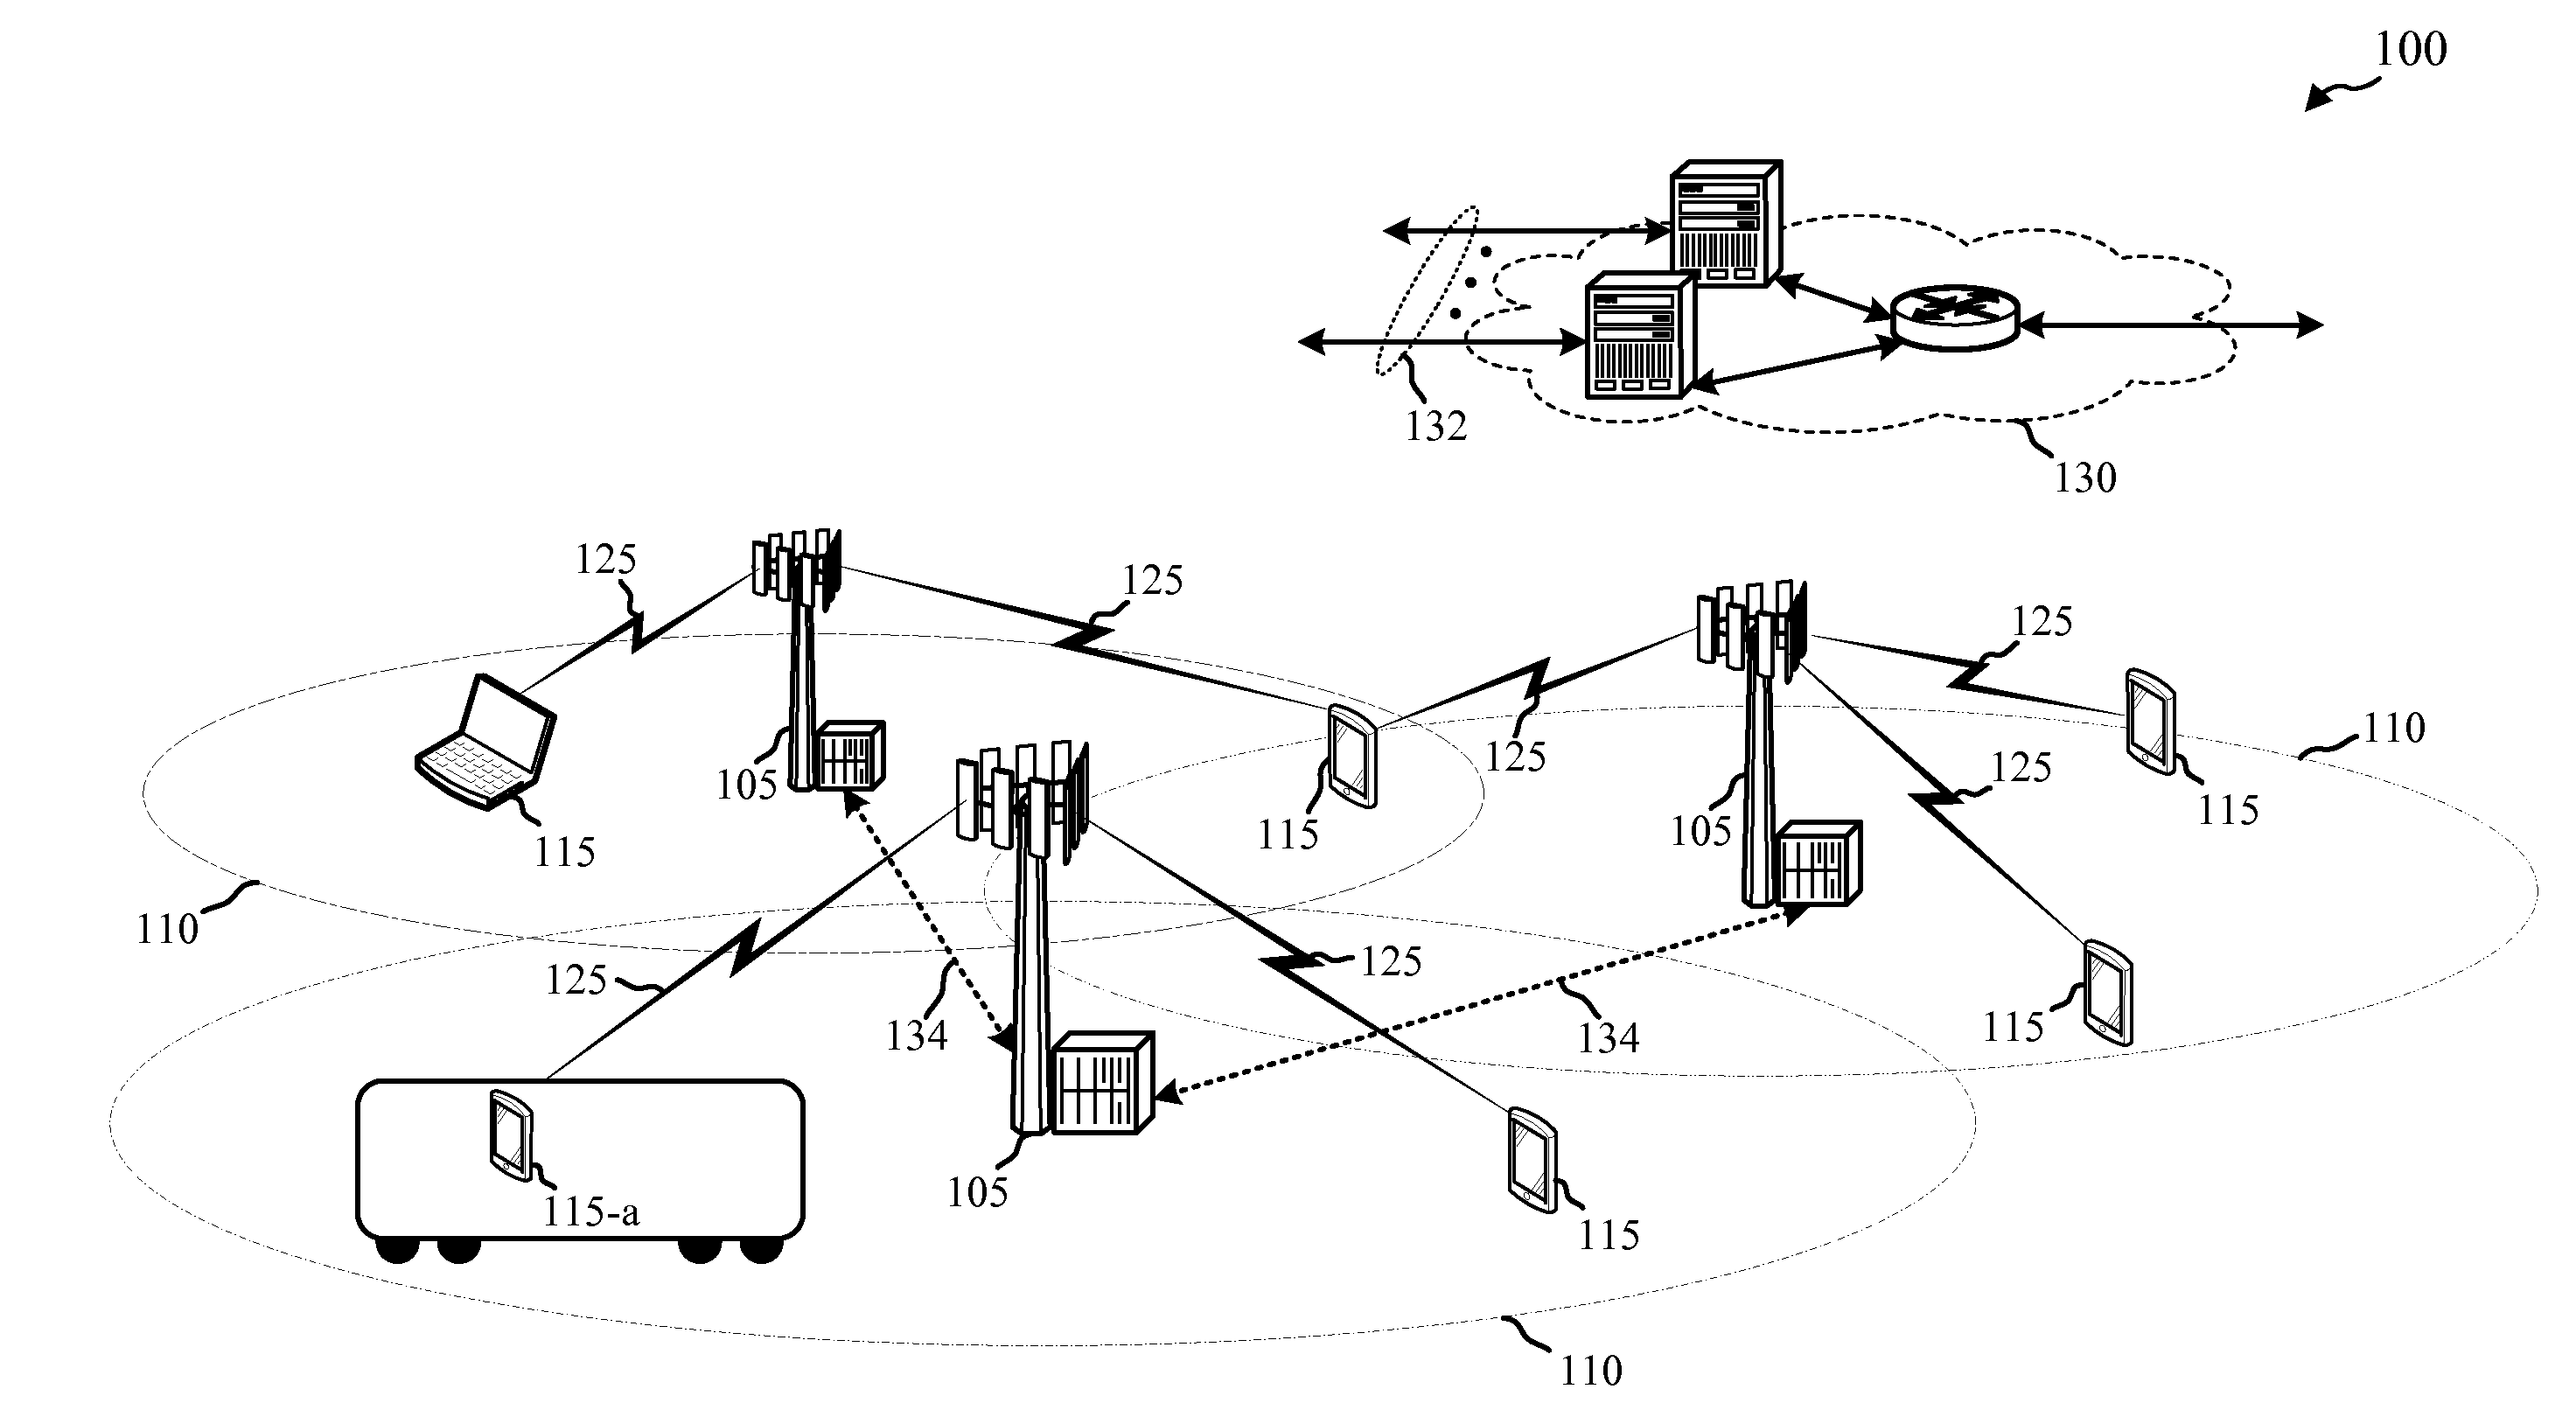 Using known geographical information in directional wireless communication systems